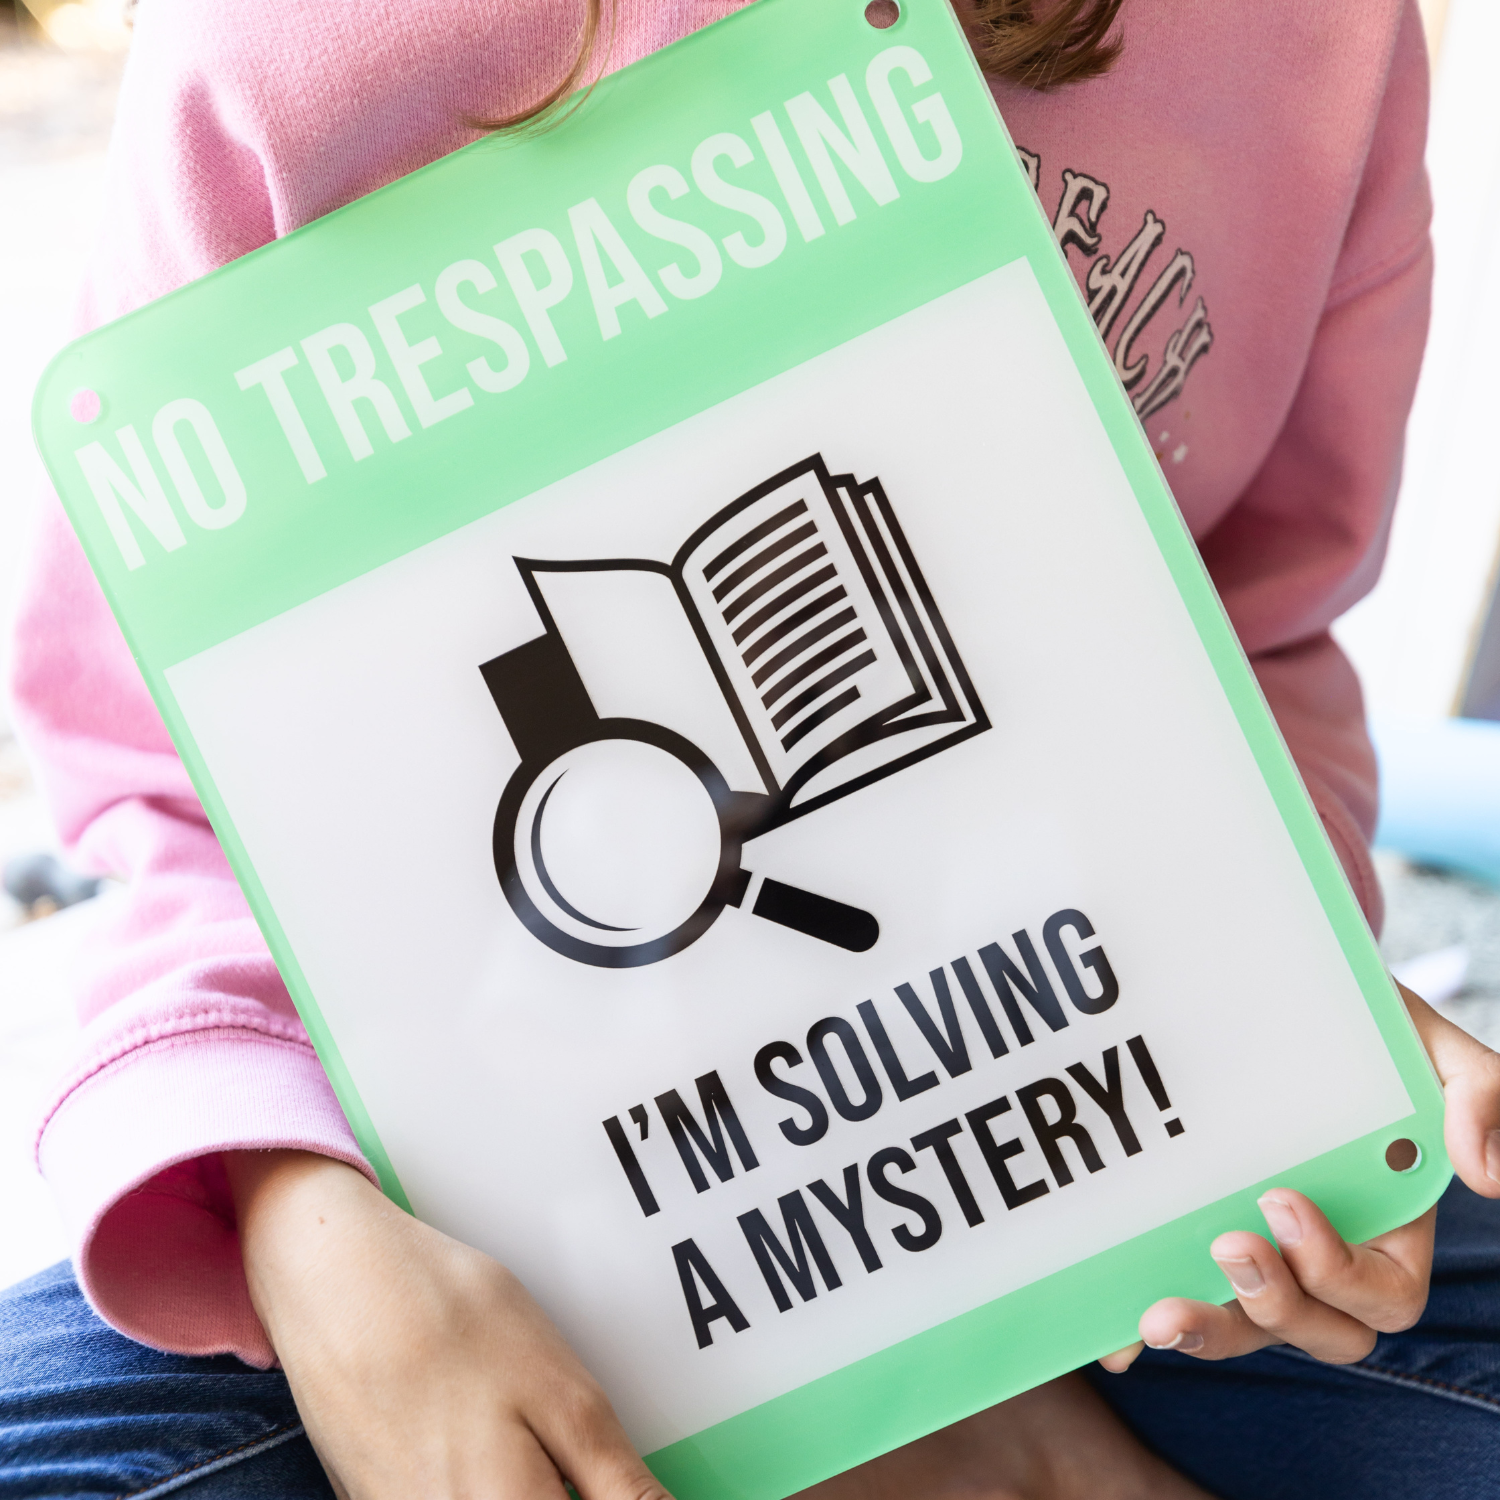 A girl wearing a pink sweatshirt holds a green and white sign that says No Trespassing I'm Solving a Mystery! with an image of a magnifying glass in front of a book at the center of the sign.